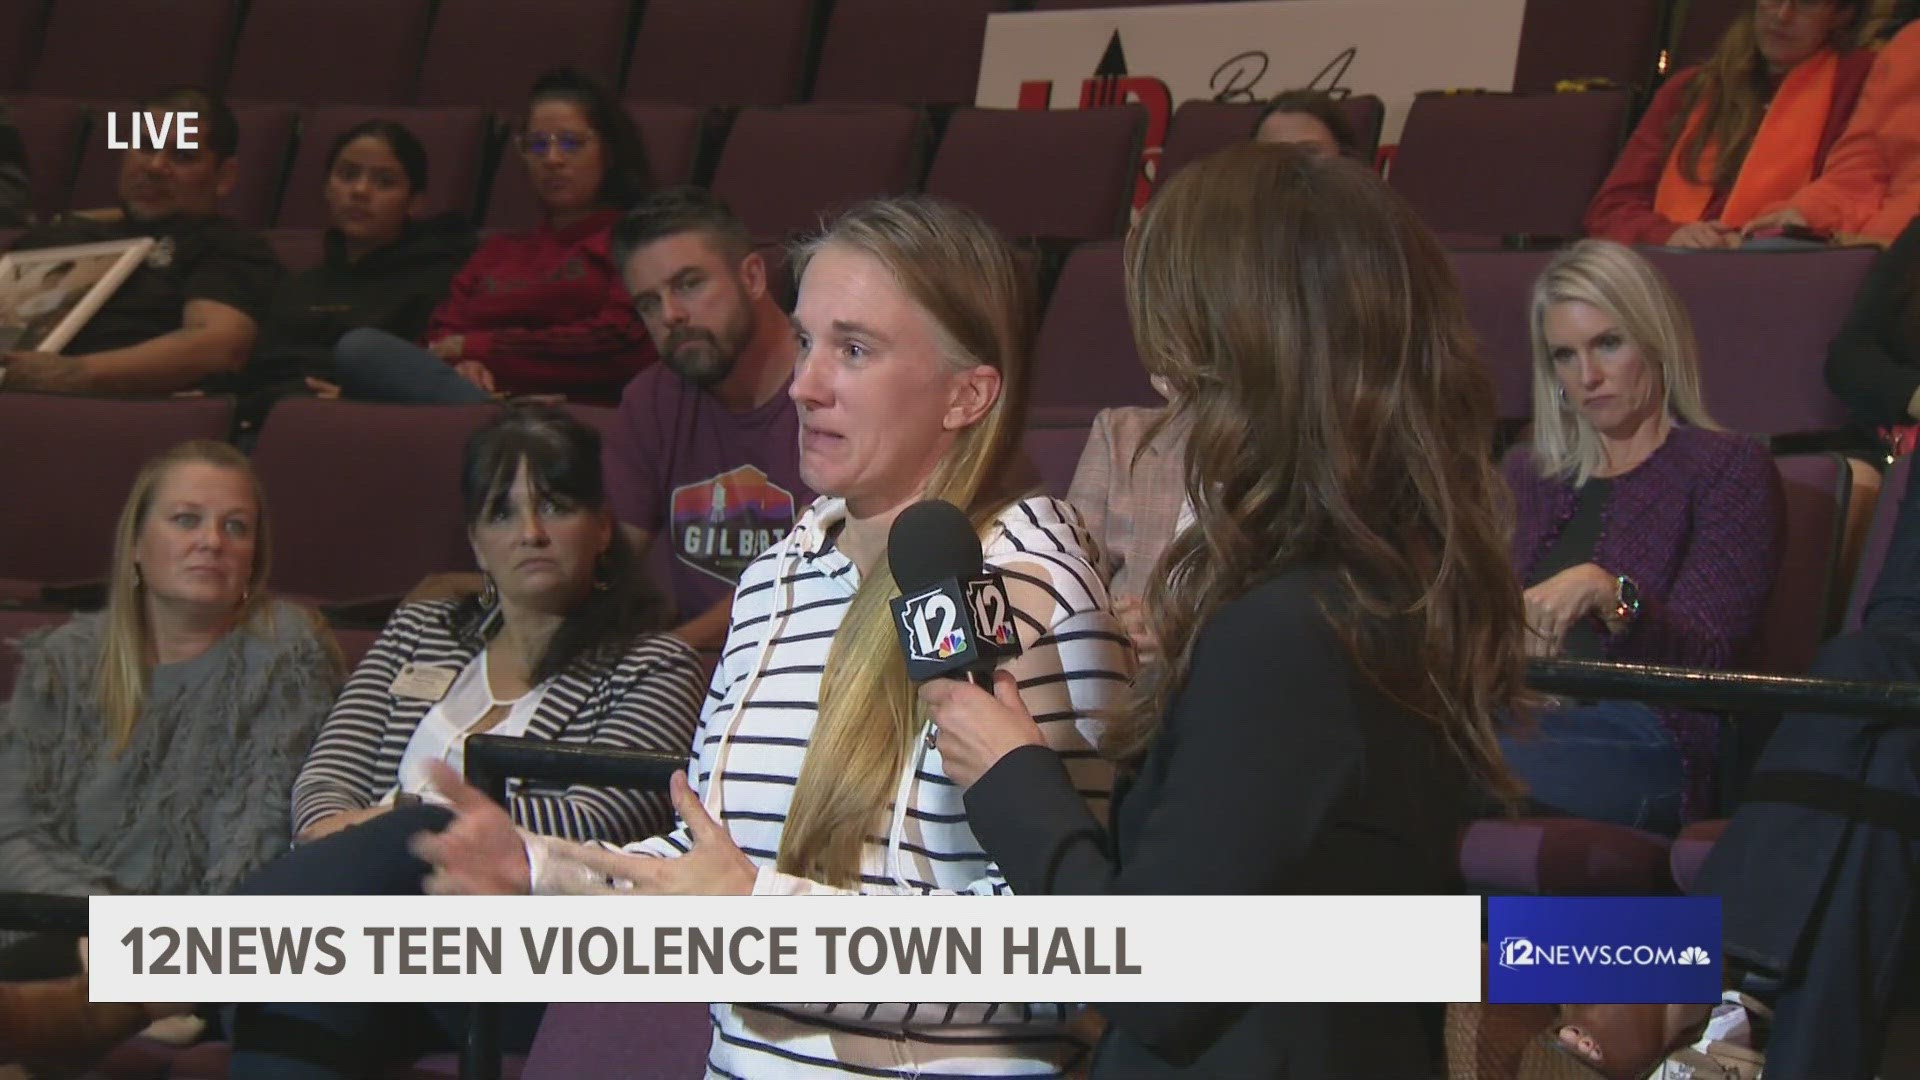 An East Valley mother describes how her daughter was sexually assaulted by teens connected to the outbreak of violence at the 12News Town Hall on Teen Violence